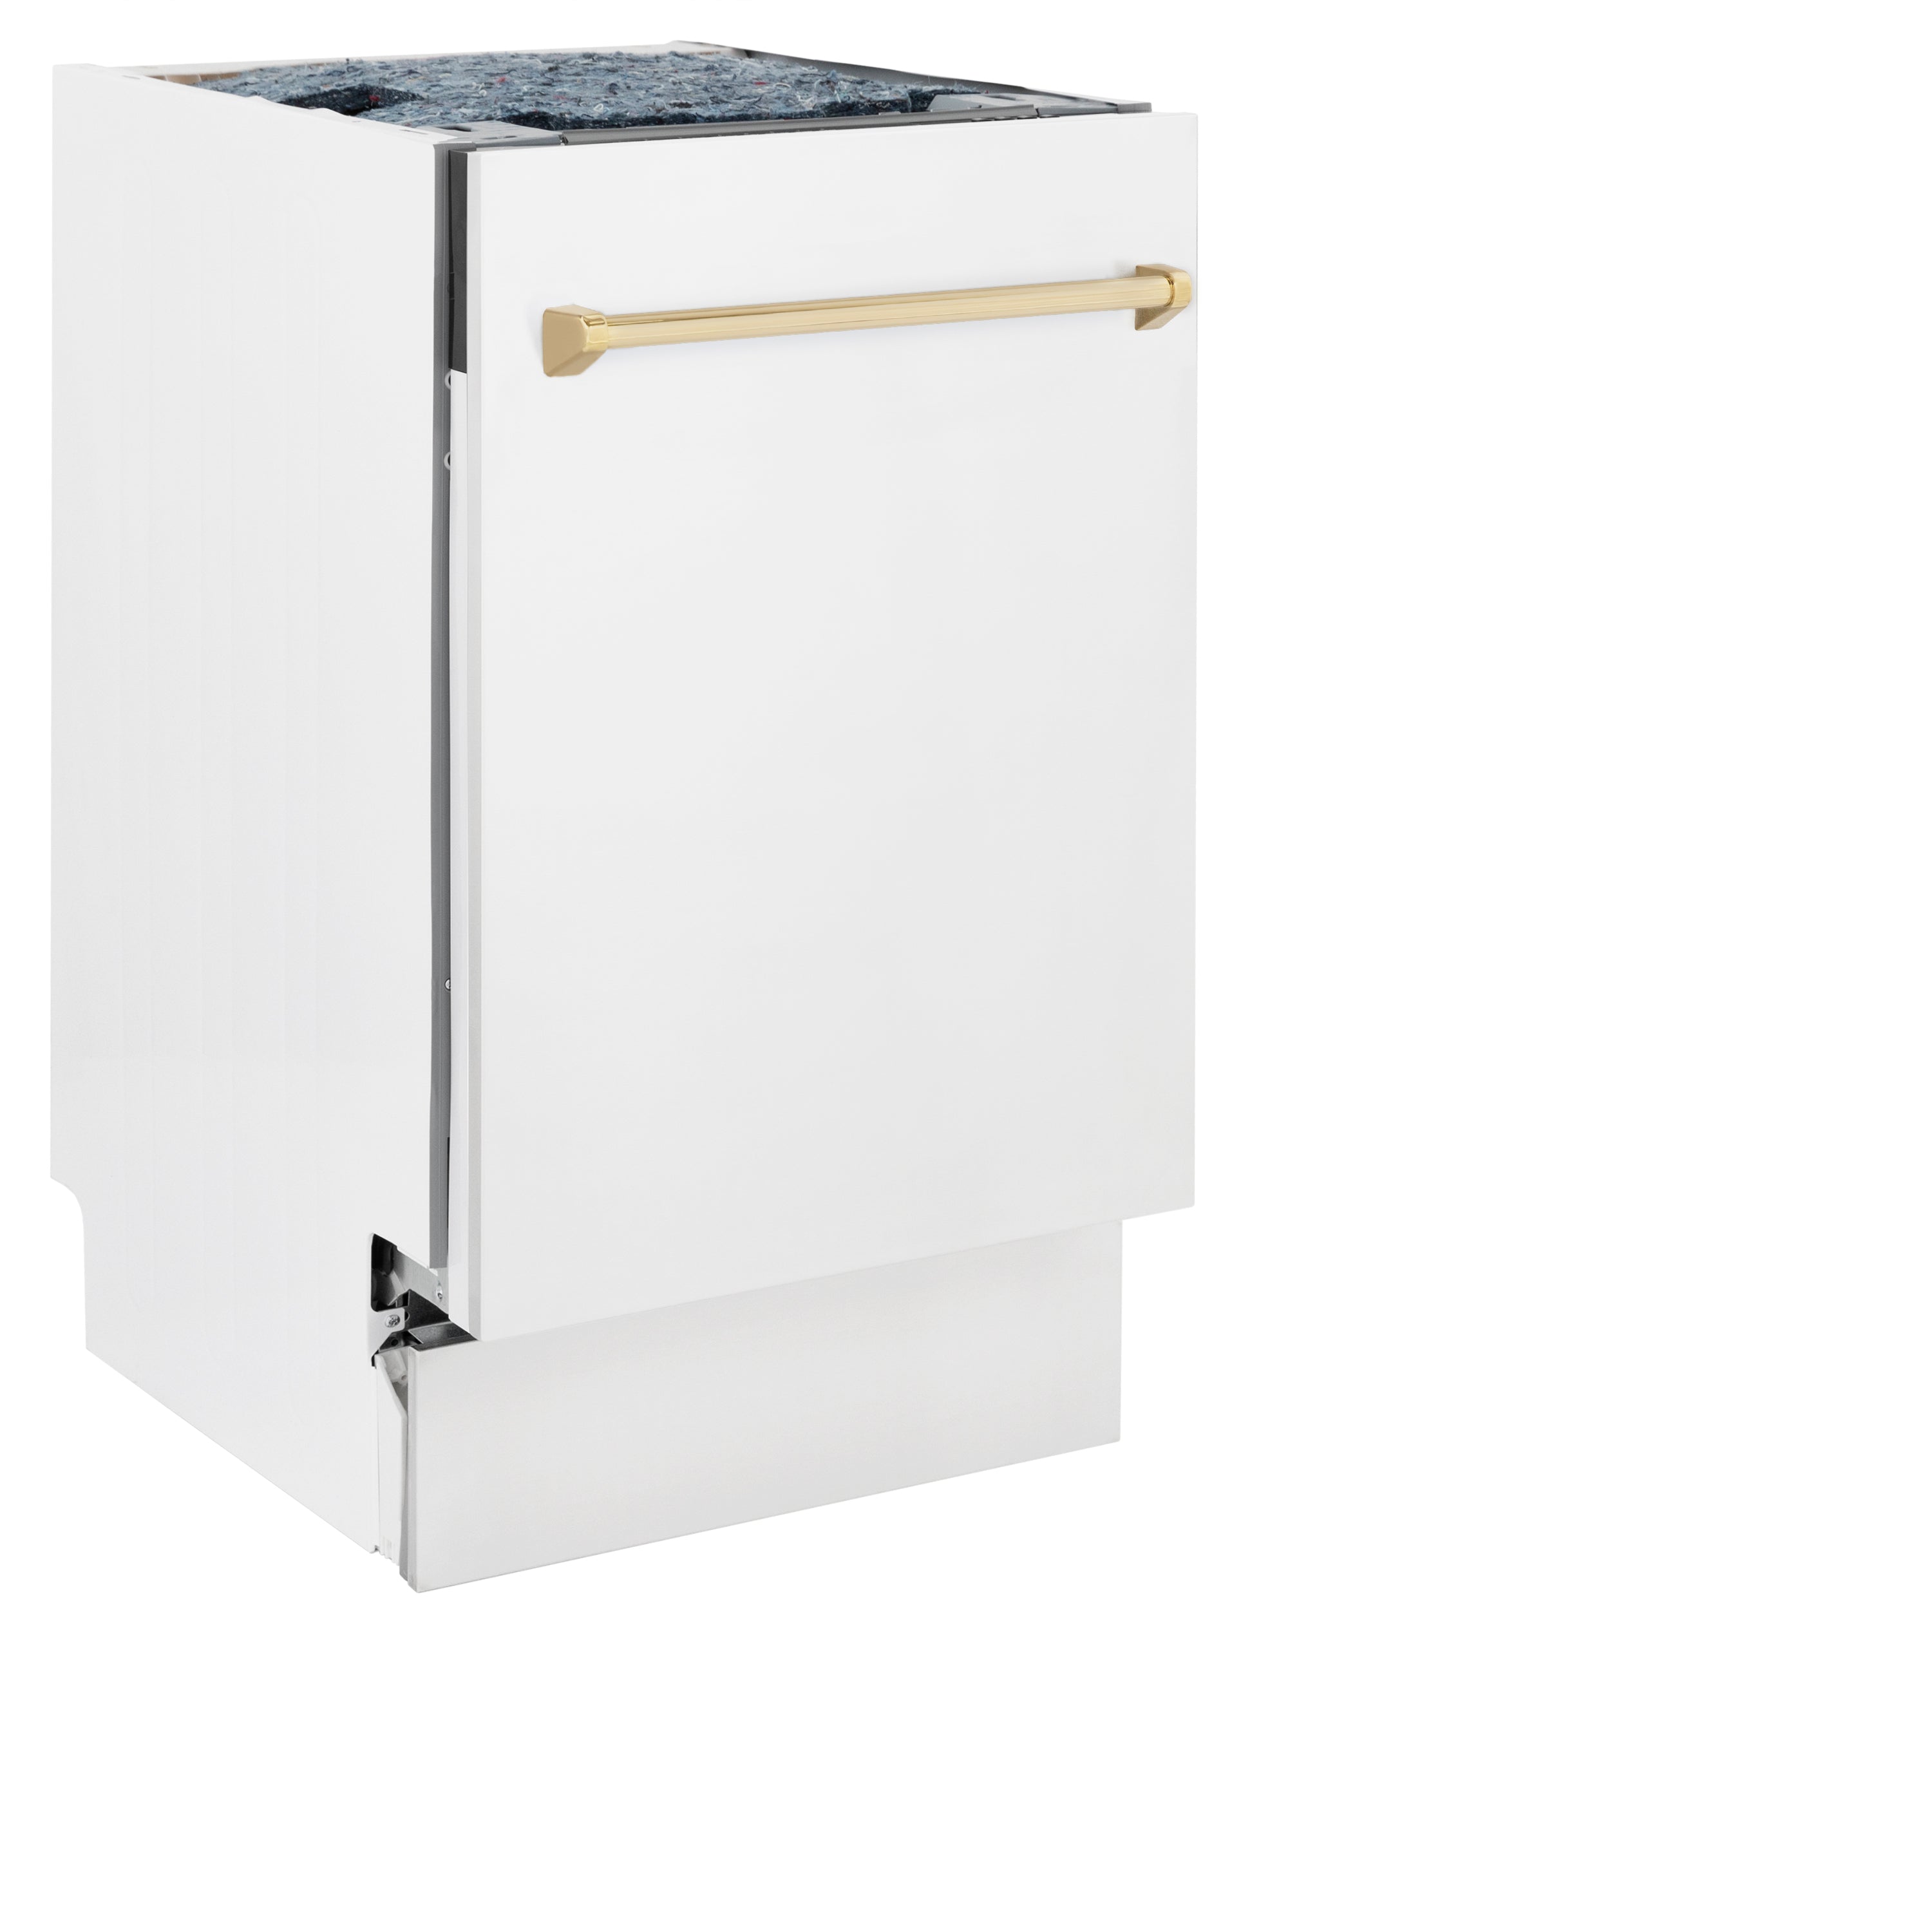 ZLINE Autograph Edition 18" Compact 3rd Rack Top Control Dishwasher in White Matte with Gold Handle, 51dBa (DWVZ-WM-18-G)